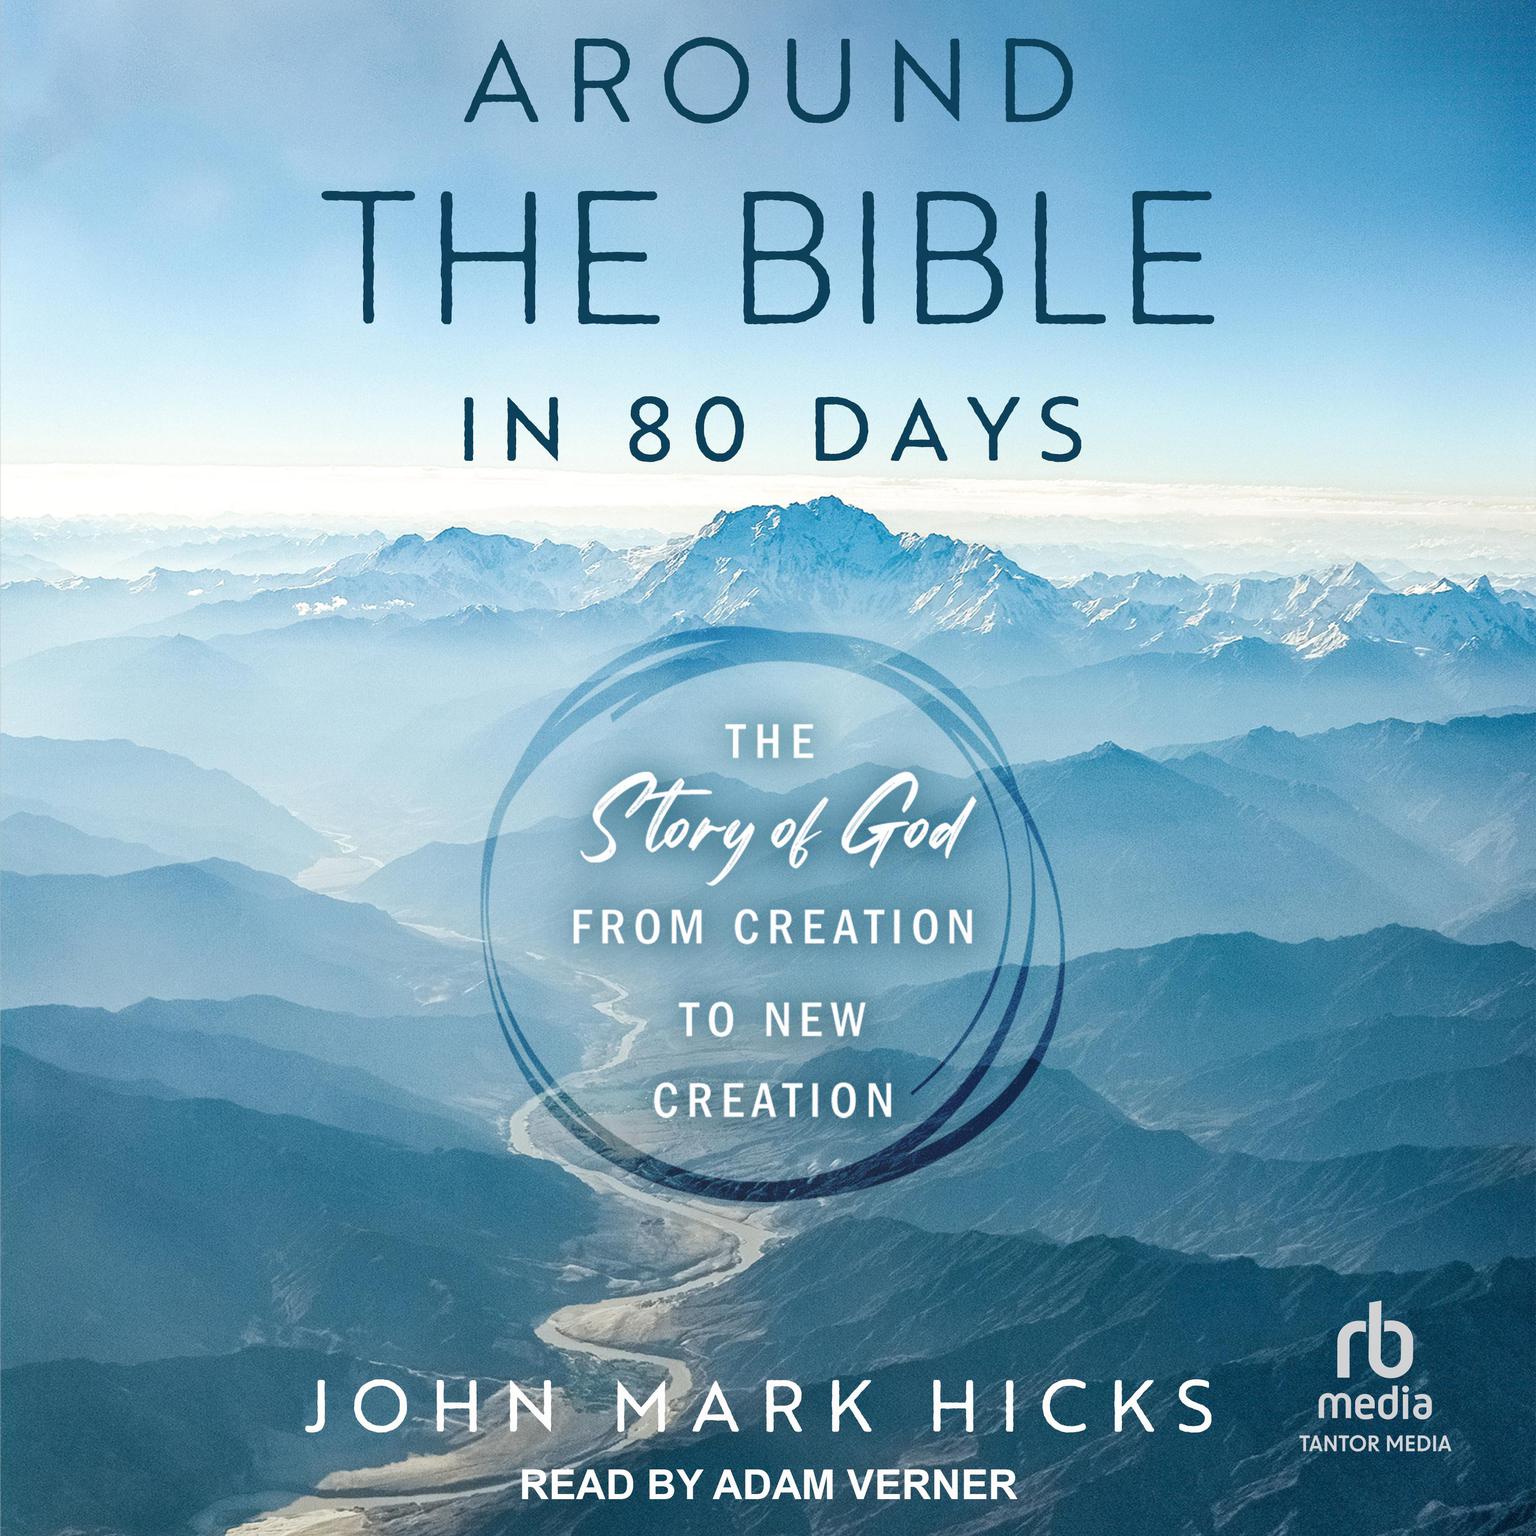 Around the Bible in 80 Days: The Story of God from Creation to New Creation Audiobook, by John Mark Hicks